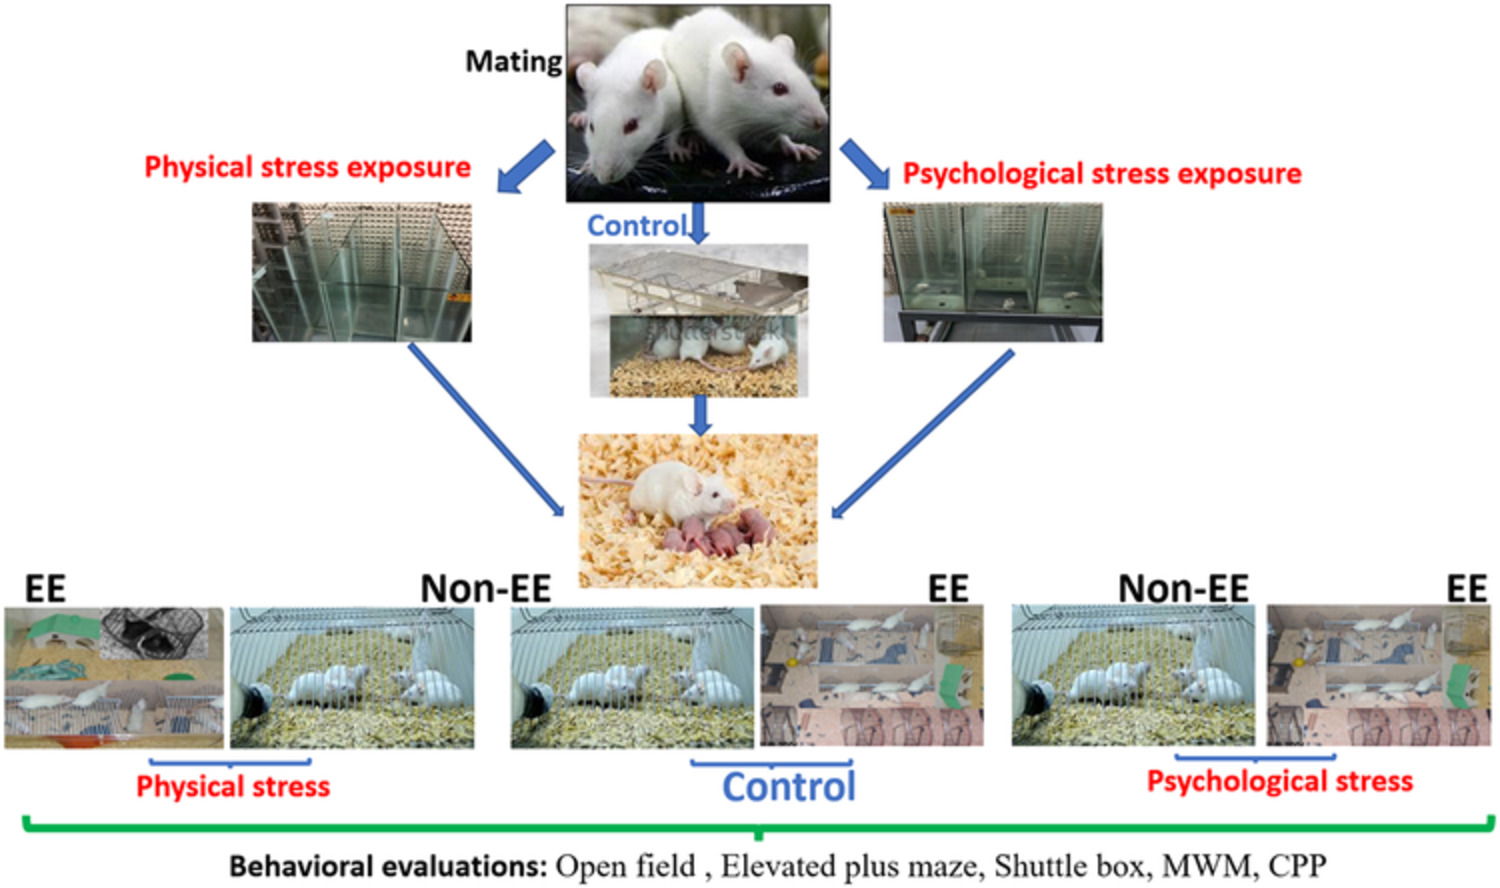 Early environmental enrichment prevents cognitive impairments and developing addictive behaviours in a mouse model of prenatal psychological and physical stress